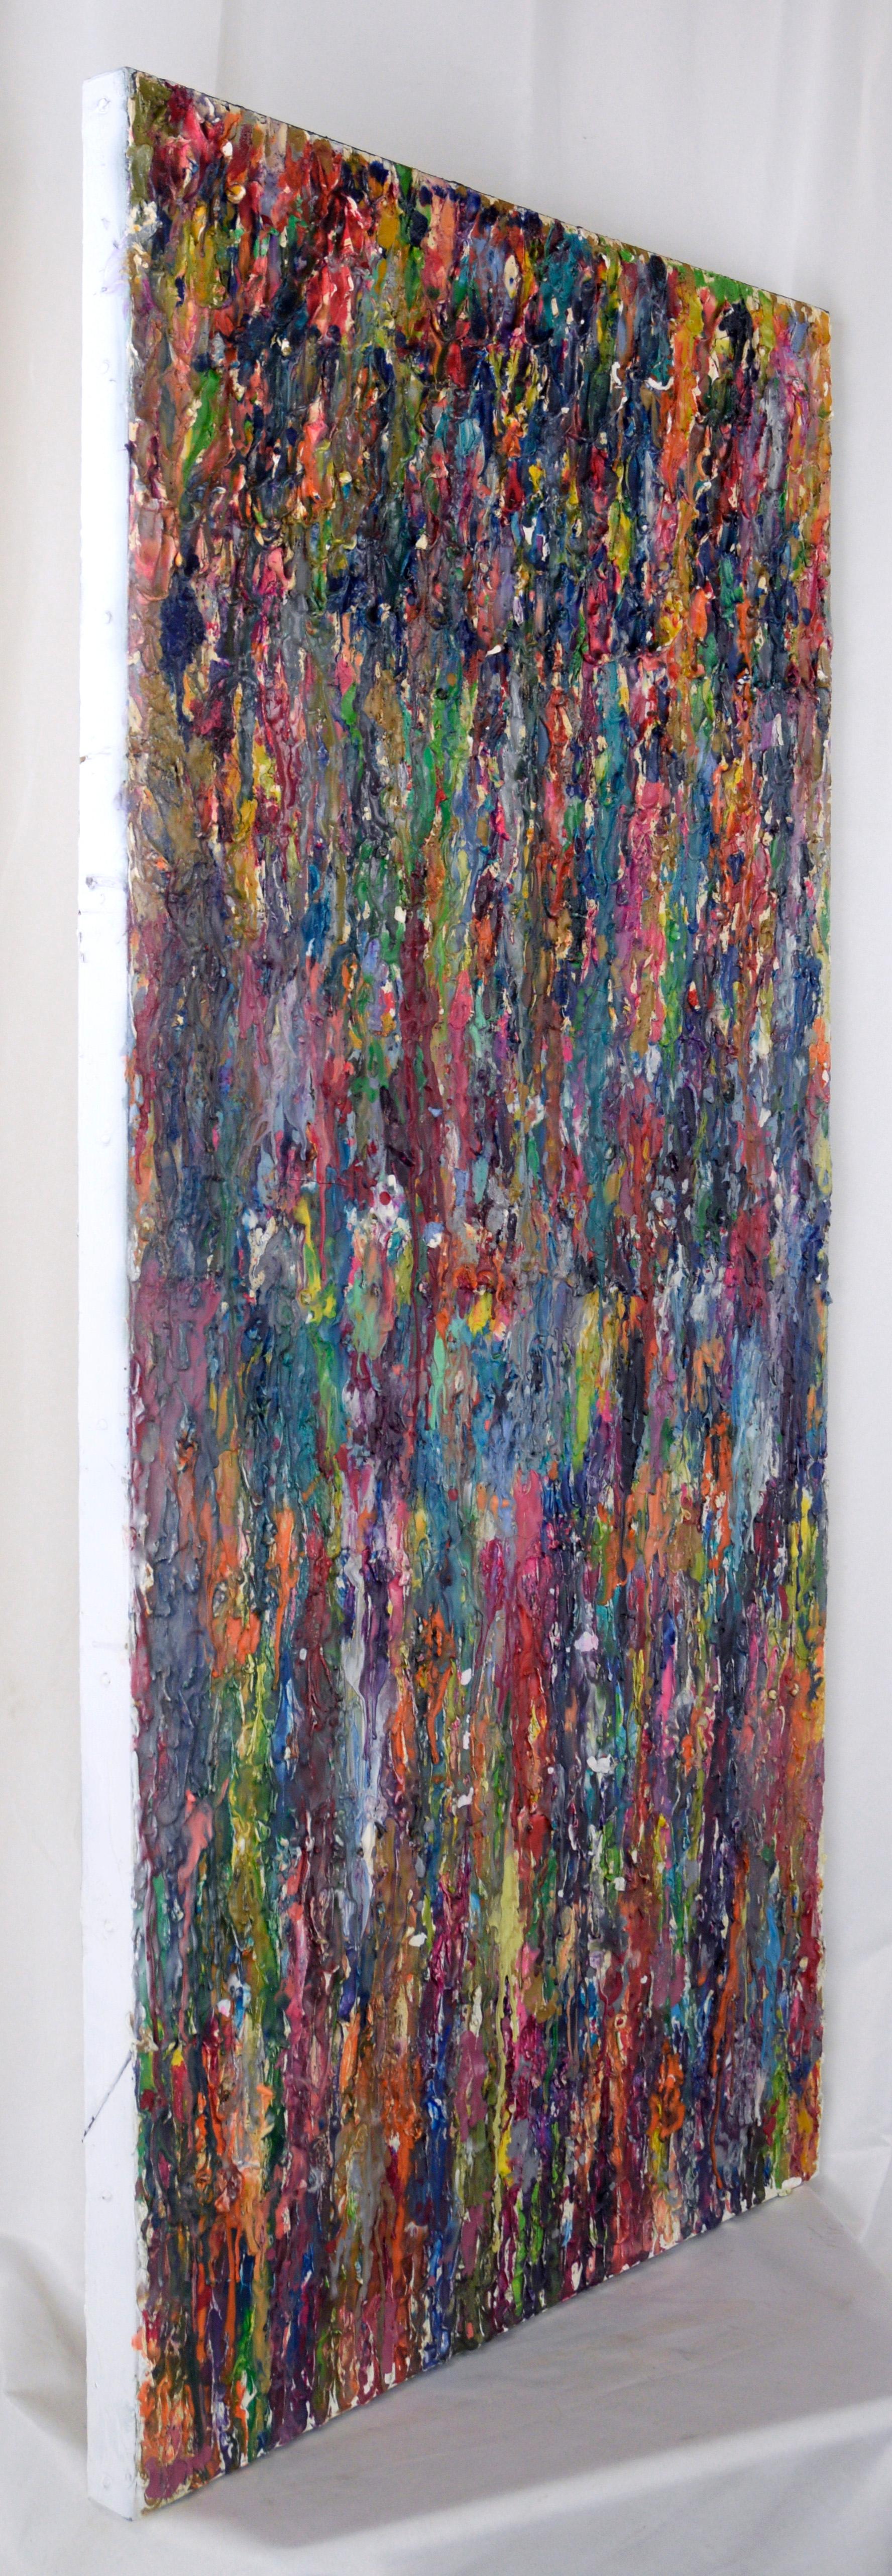 Textured Abstract Expressionist Composition in Plaster and Acrylic on Canvas For Sale 7